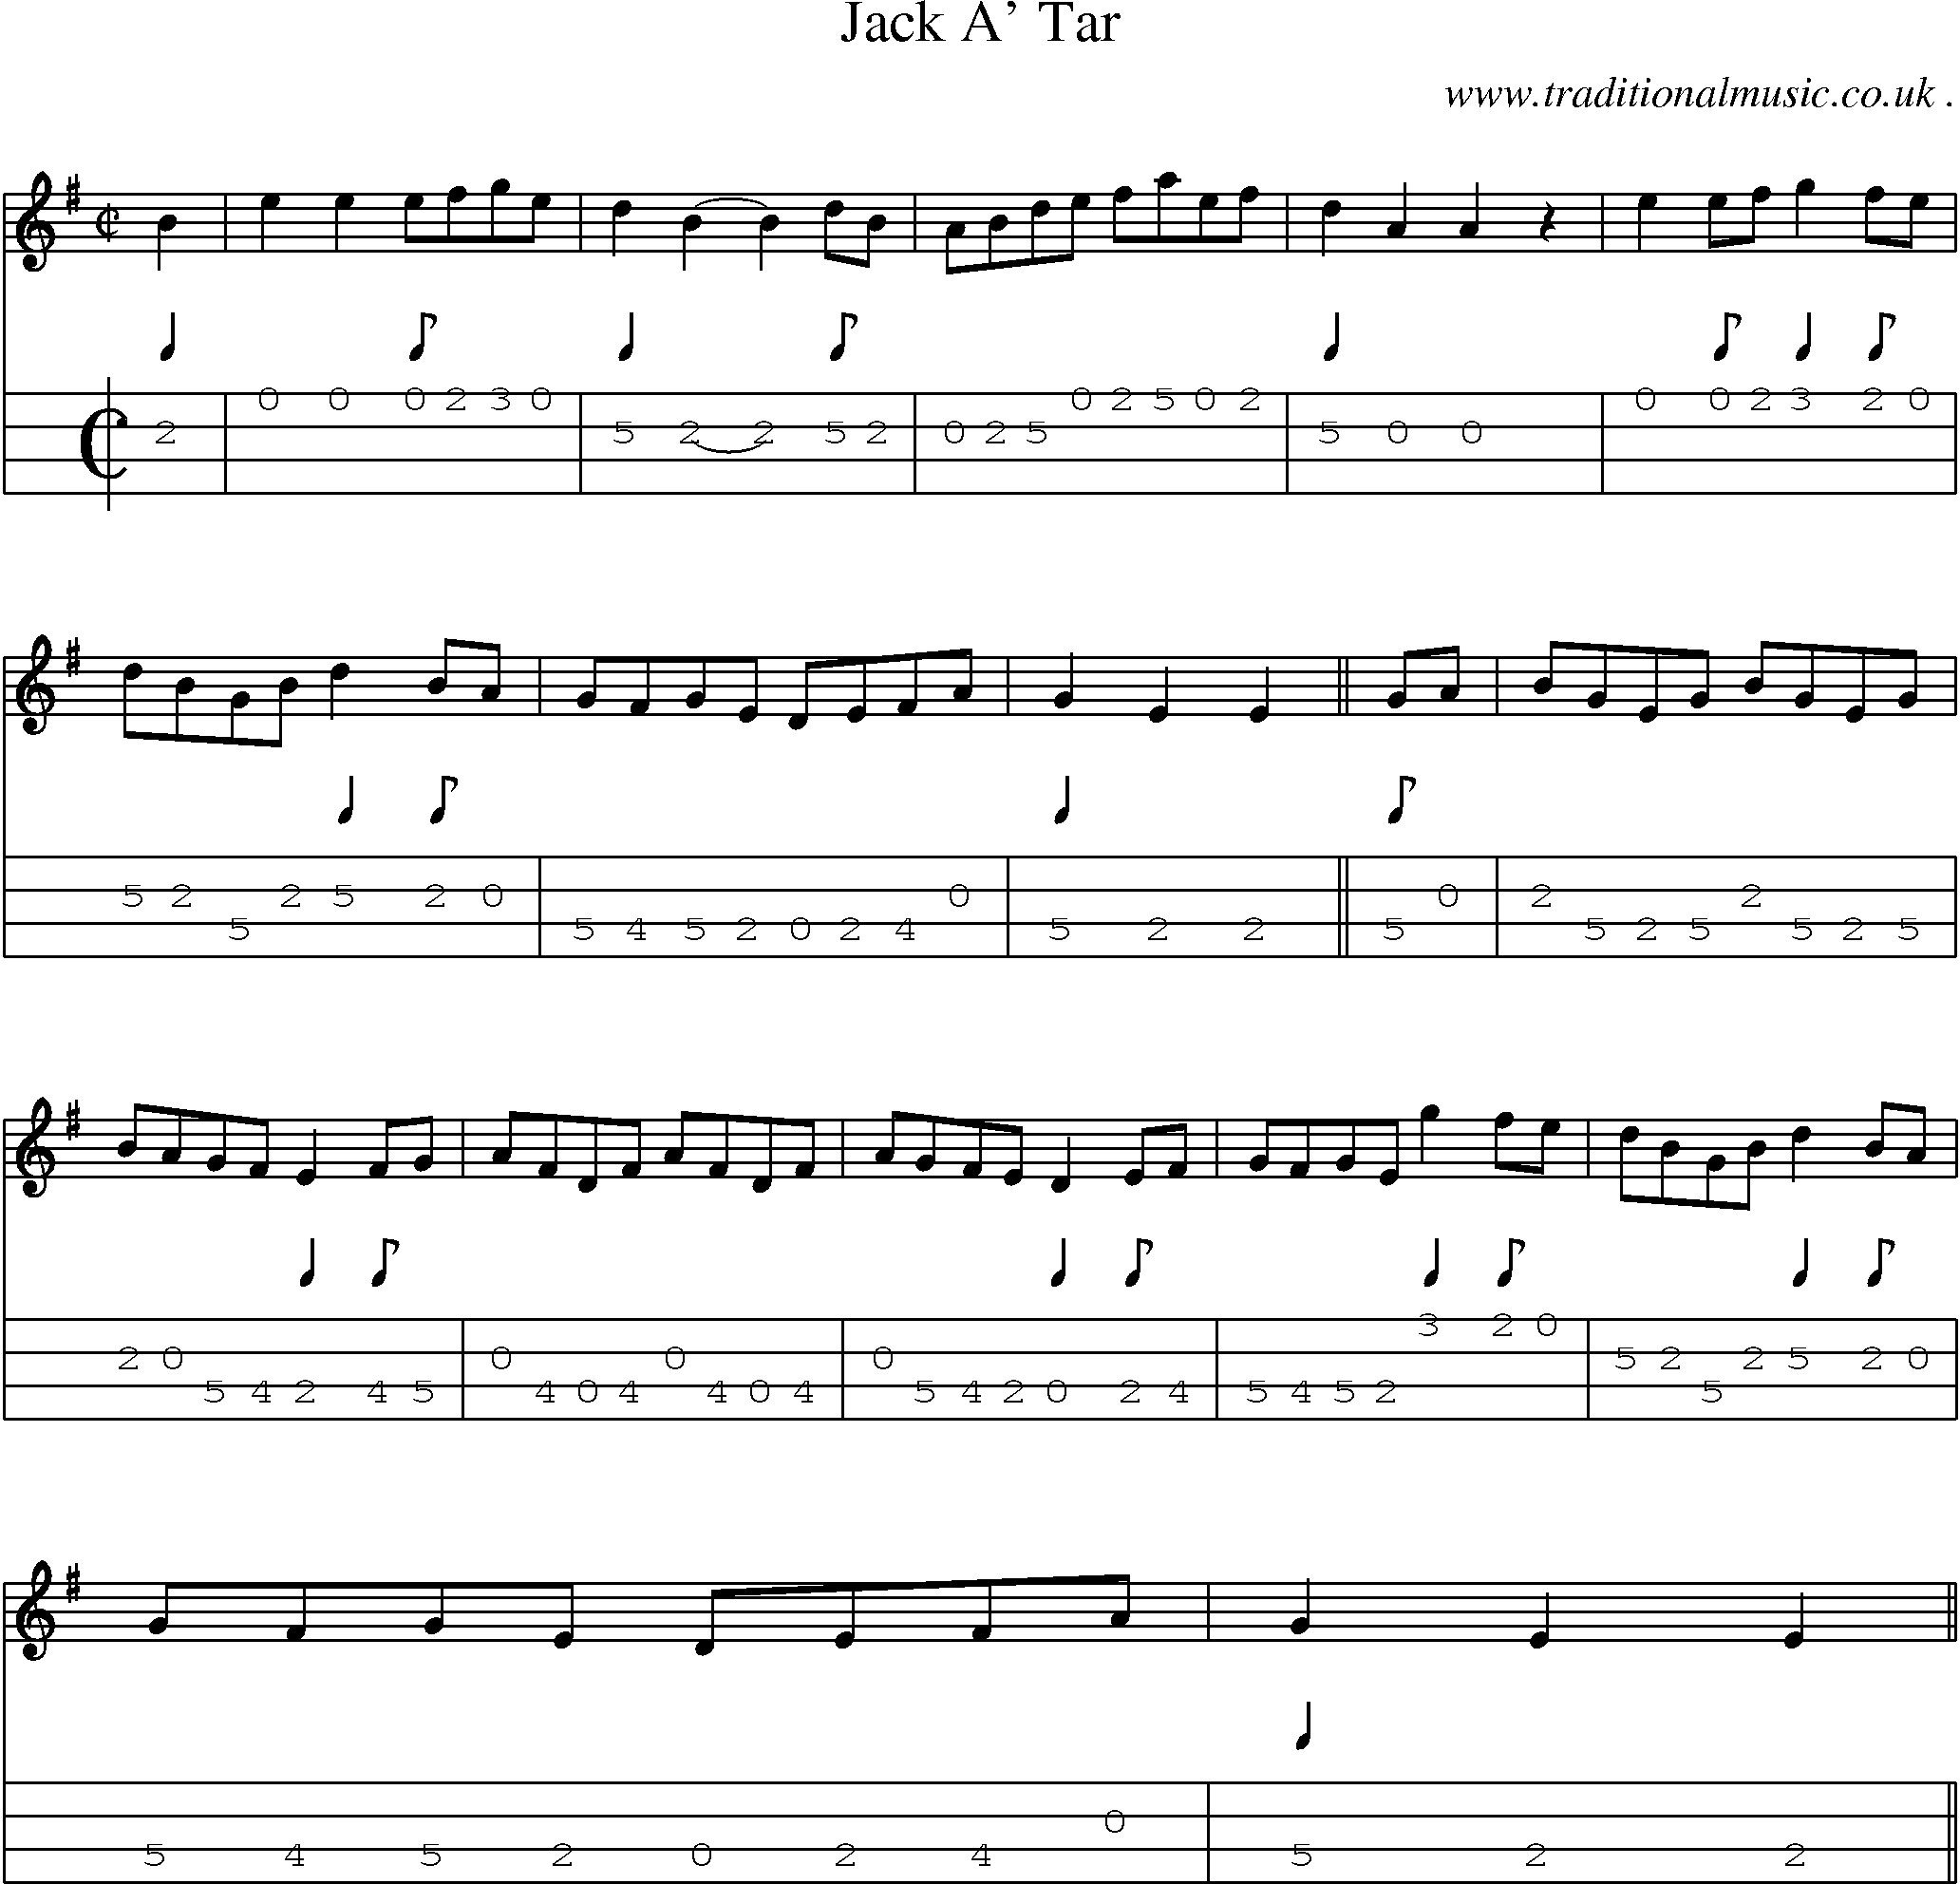 Sheet-music  score, Chords and Mandolin Tabs for Jack A Tar